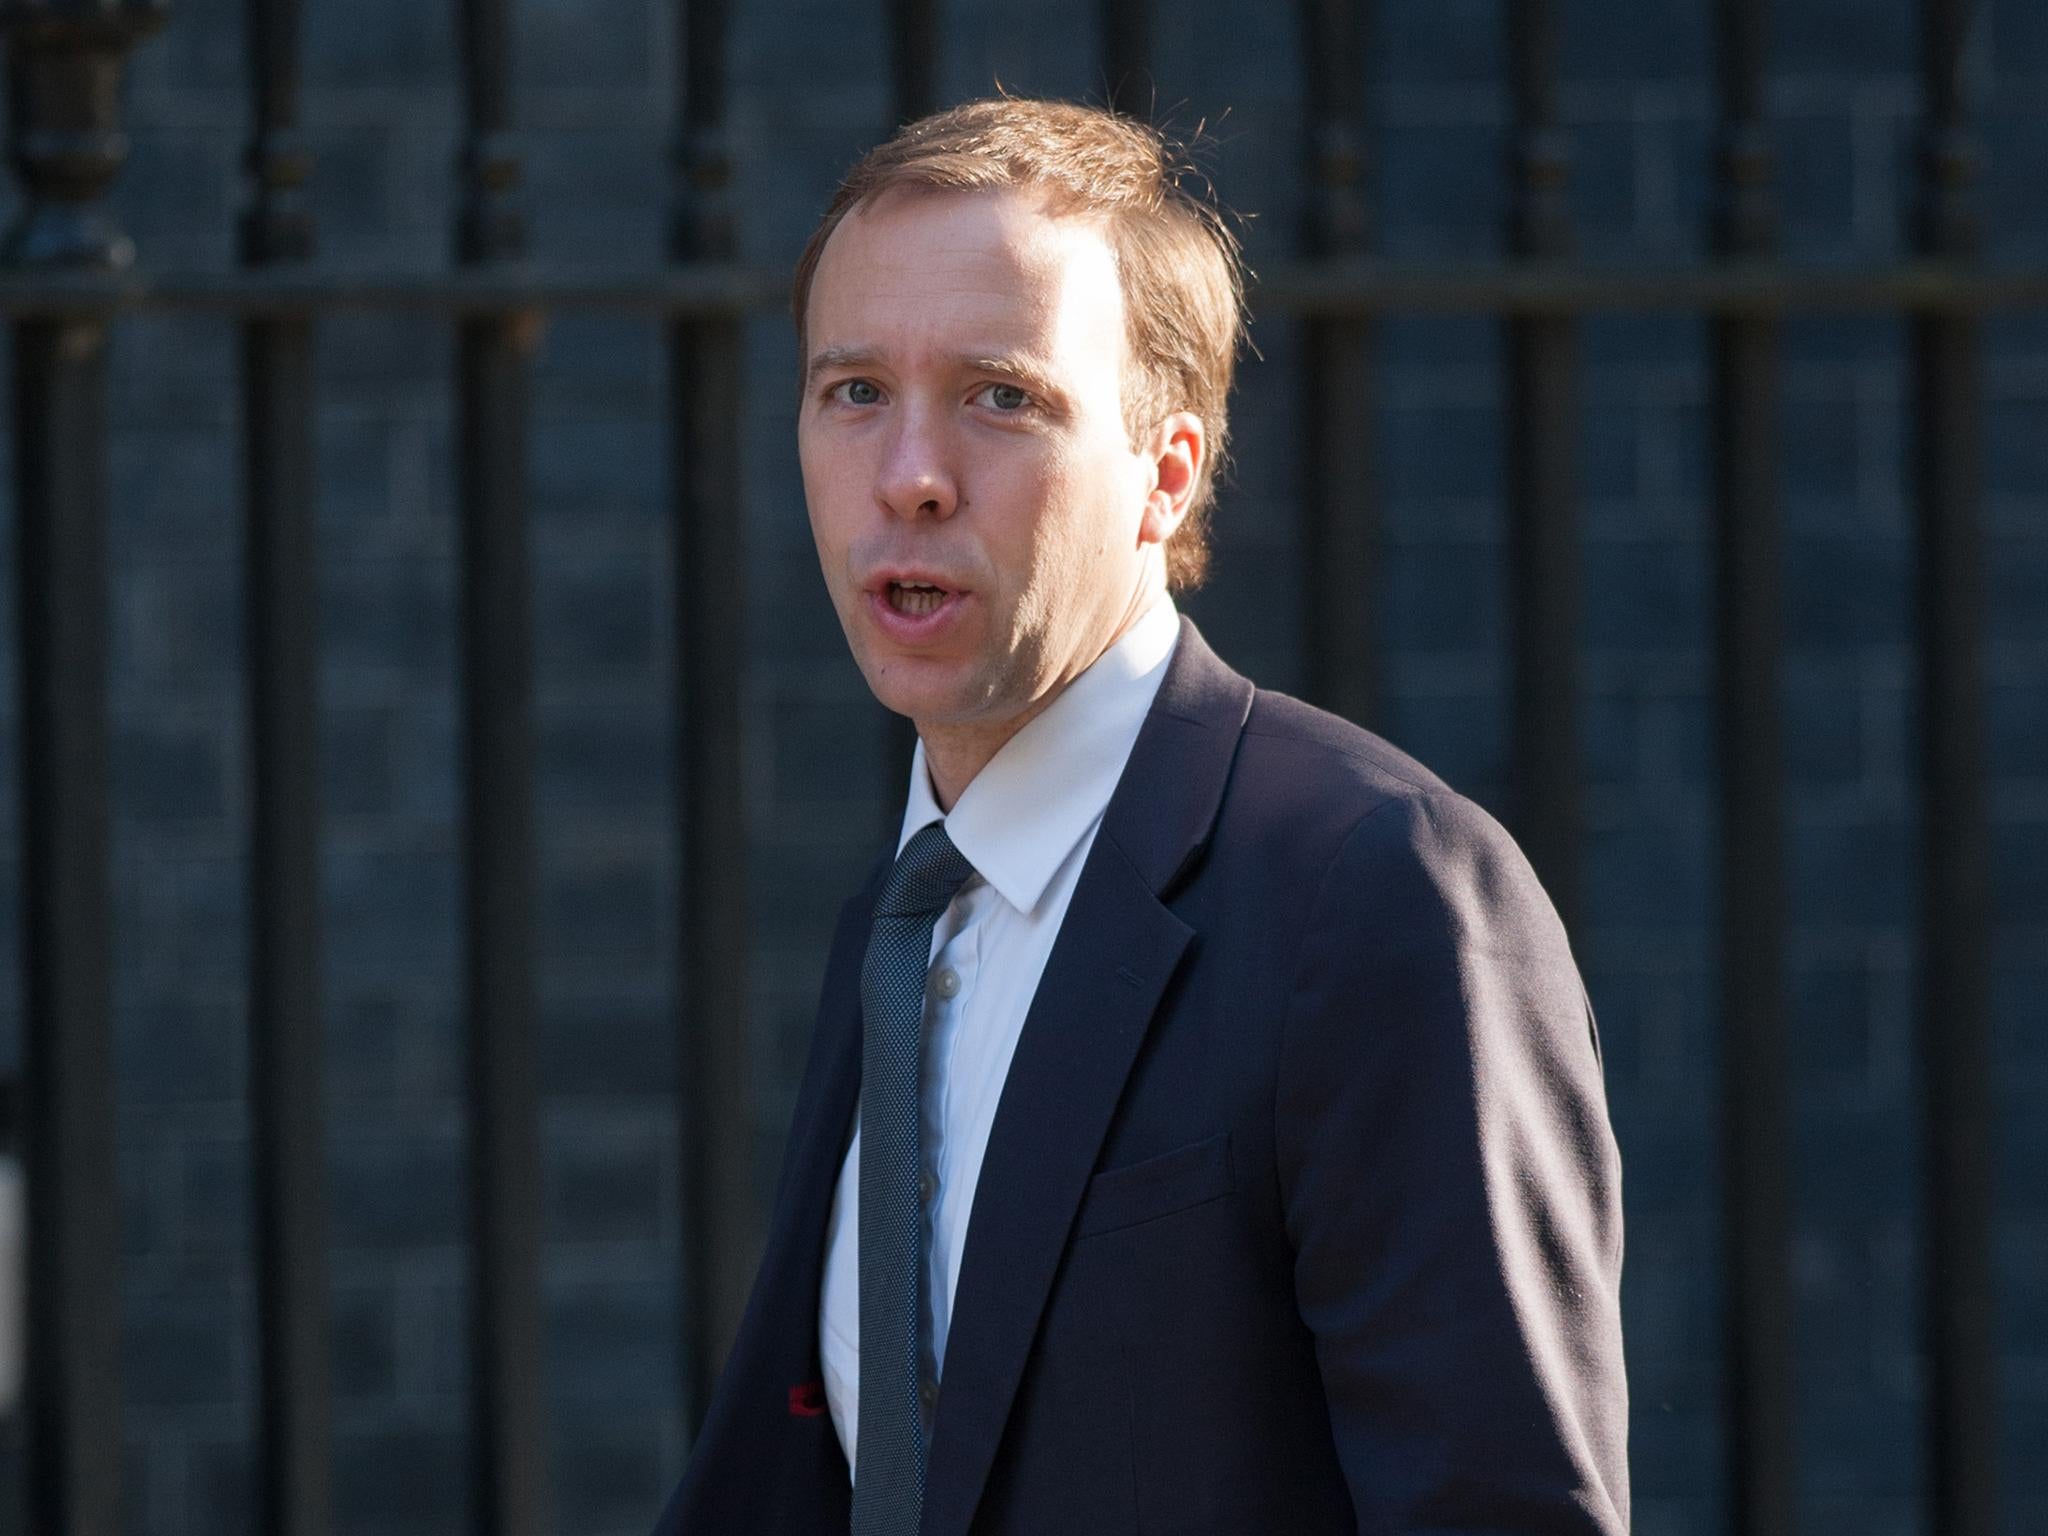 Matt Hancock, the Digital, Culture, Media and Sport Secretary, has conceded that the Information Commissioner may need more powers such as on-the-spot searches and the right to compel people to give evidence